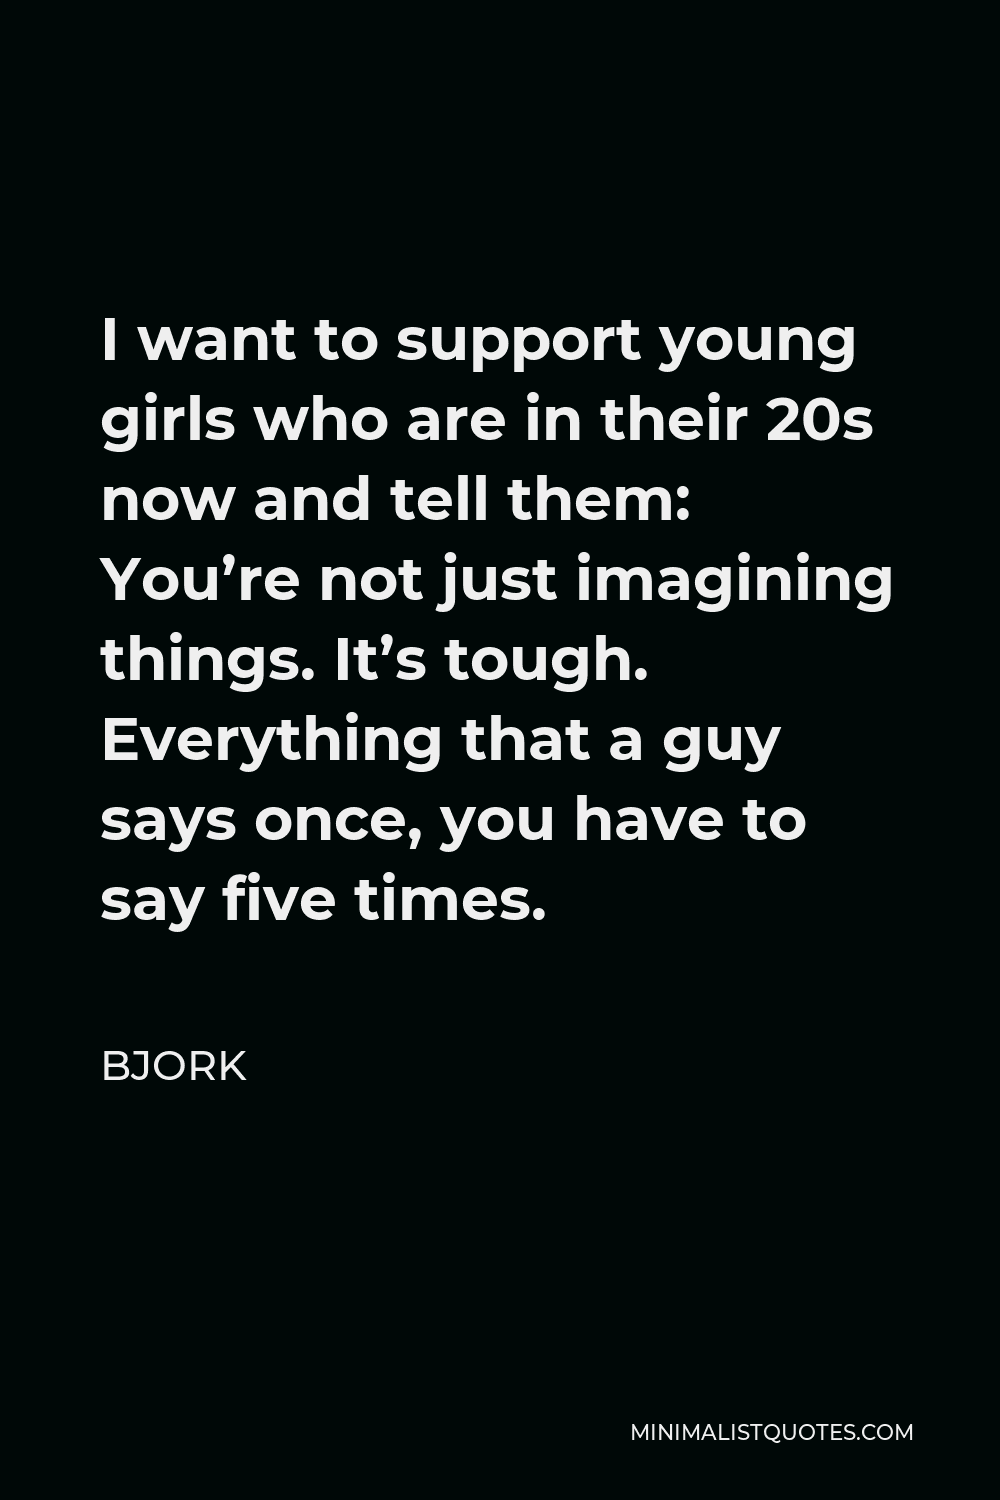 Bjork Quote - I want to support young girls who are in their 20s now and tell them: You’re not just imagining things. It’s tough.